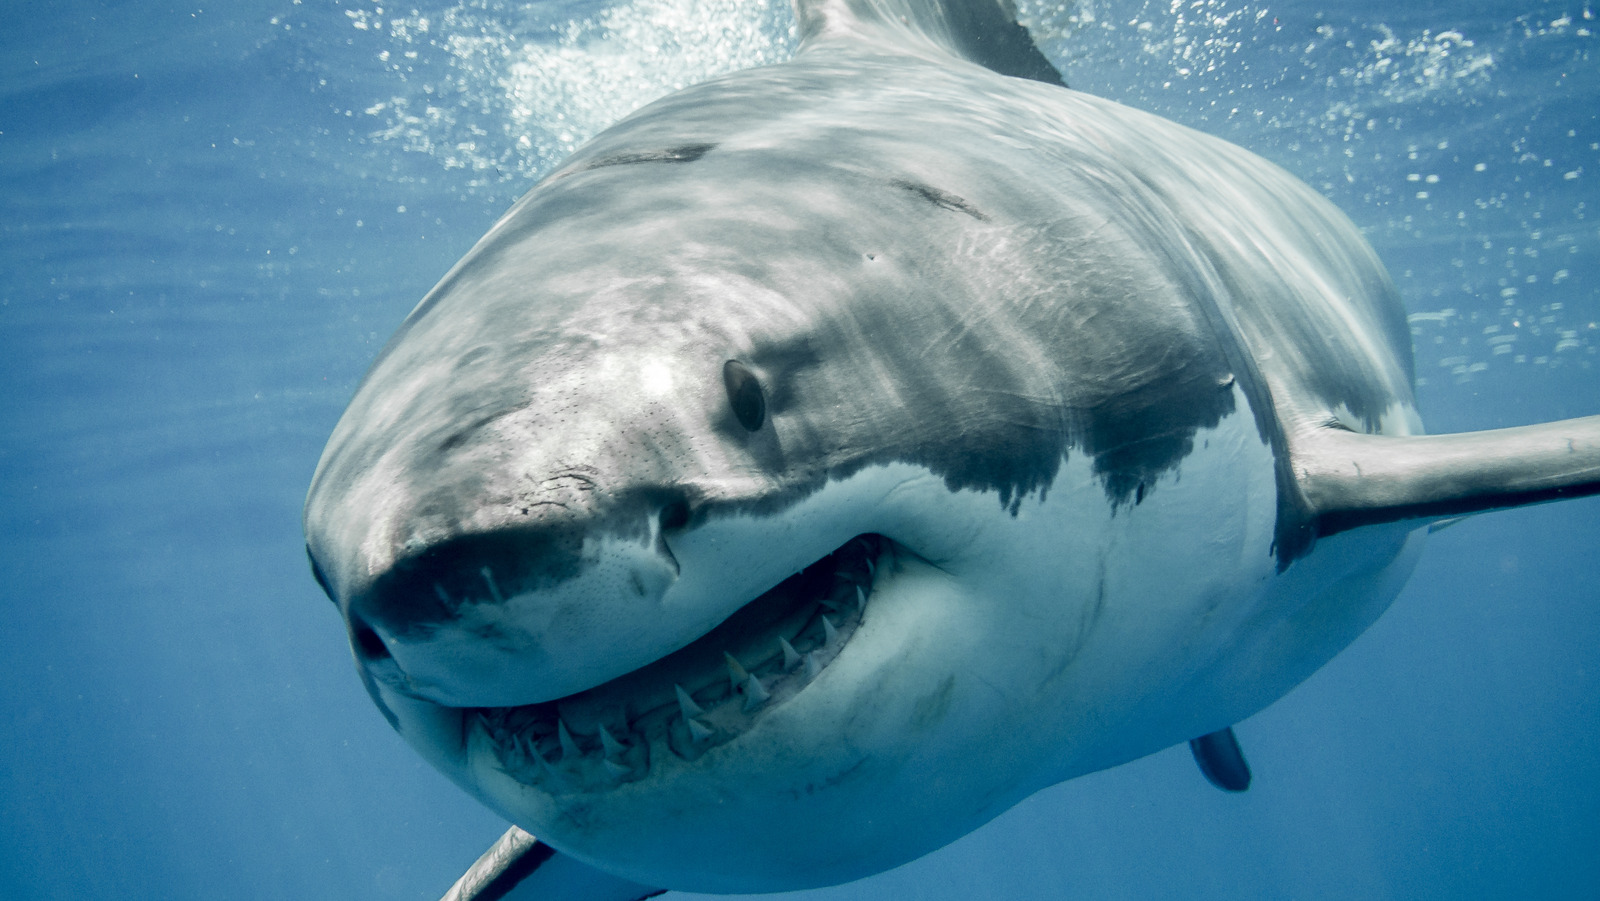 Shark attacks in Australia most prevalent in the world. Why?